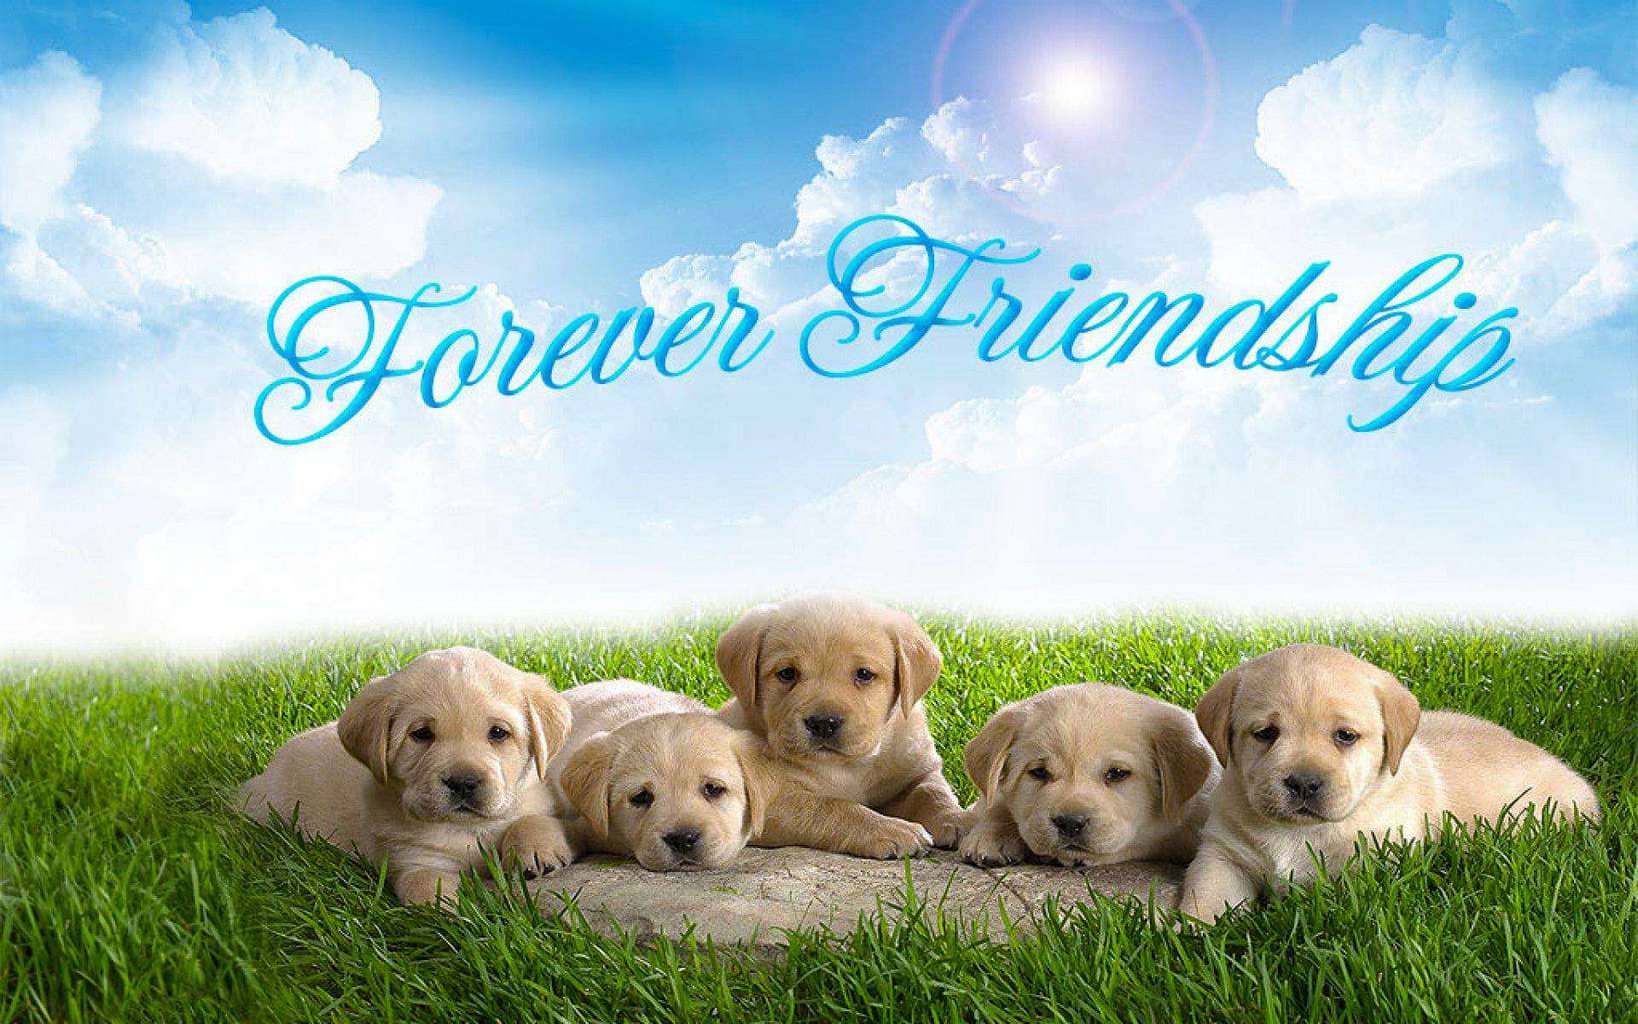 Friends-forever-puppy-group